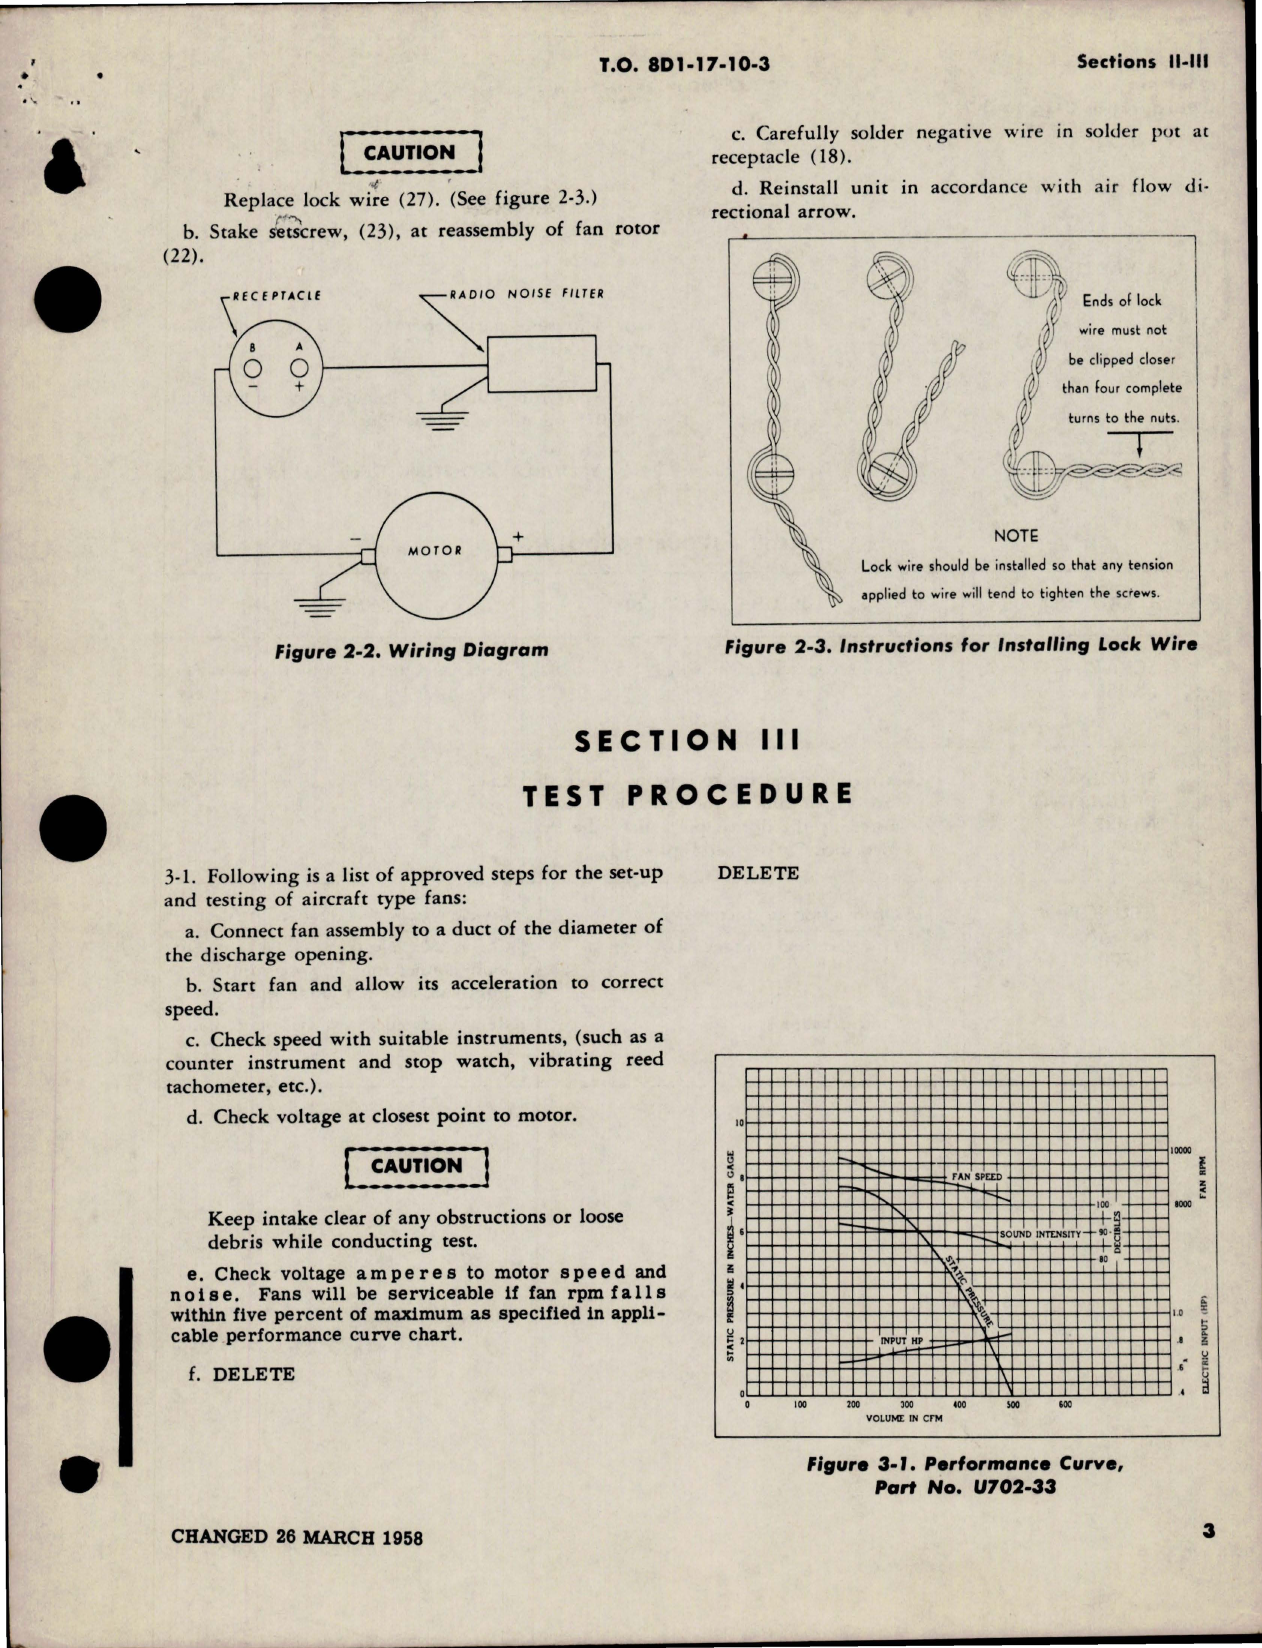 Sample page 7 from AirCorps Library document: Overhaul Instructions for Axivane Aircraft Fans - Parts U702 and X702 Series 